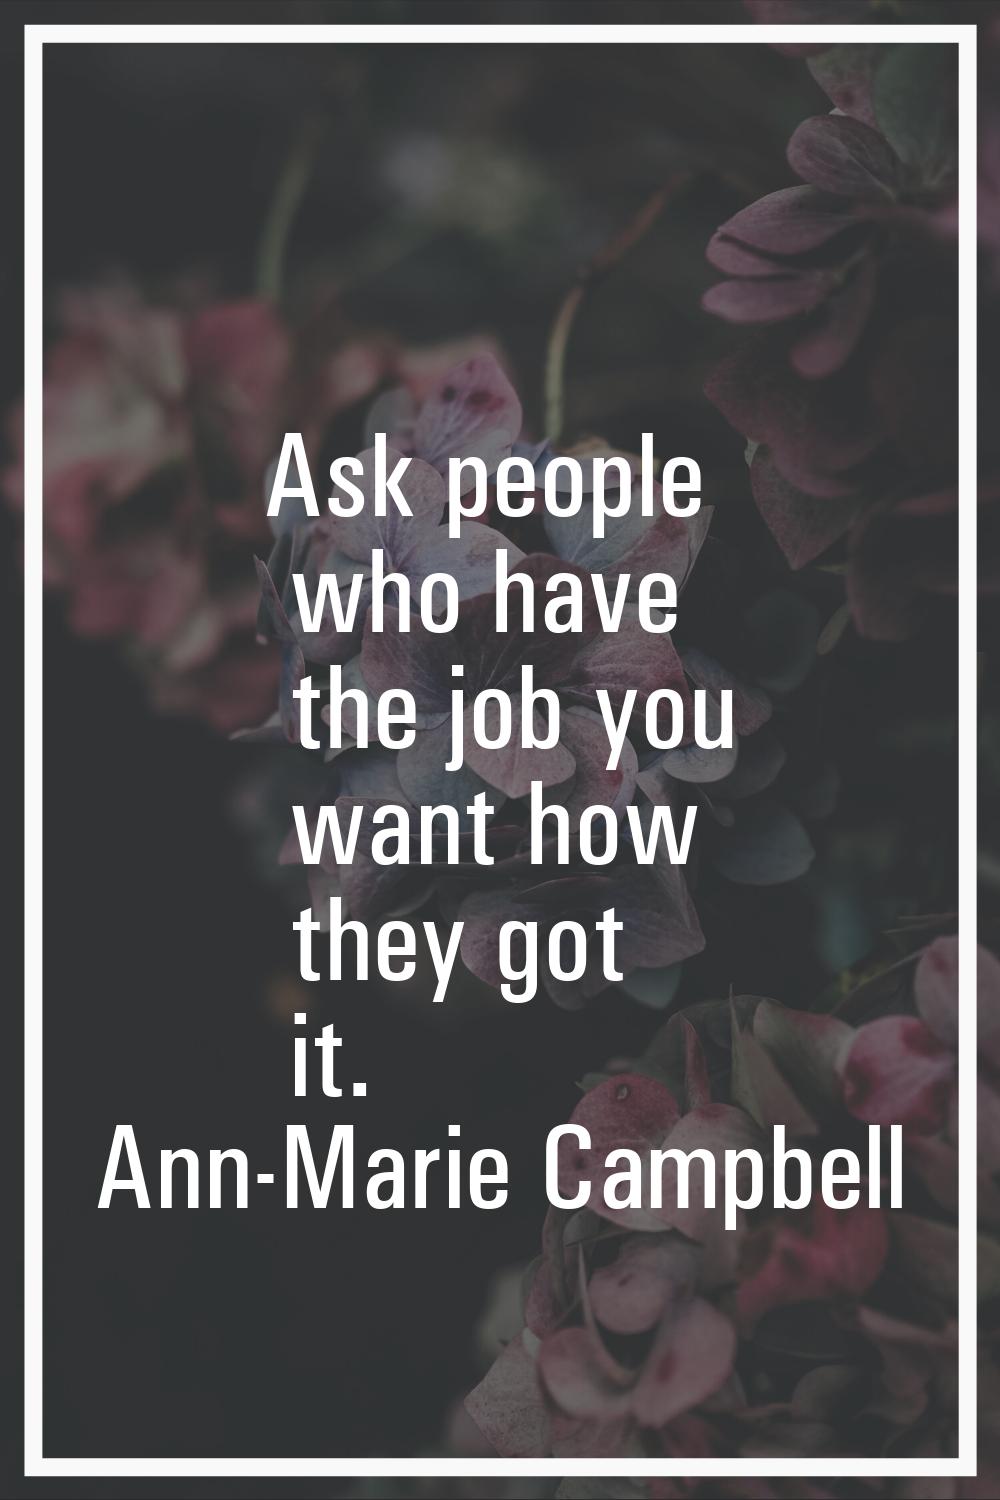 Ask people who have the job you want how they got it.